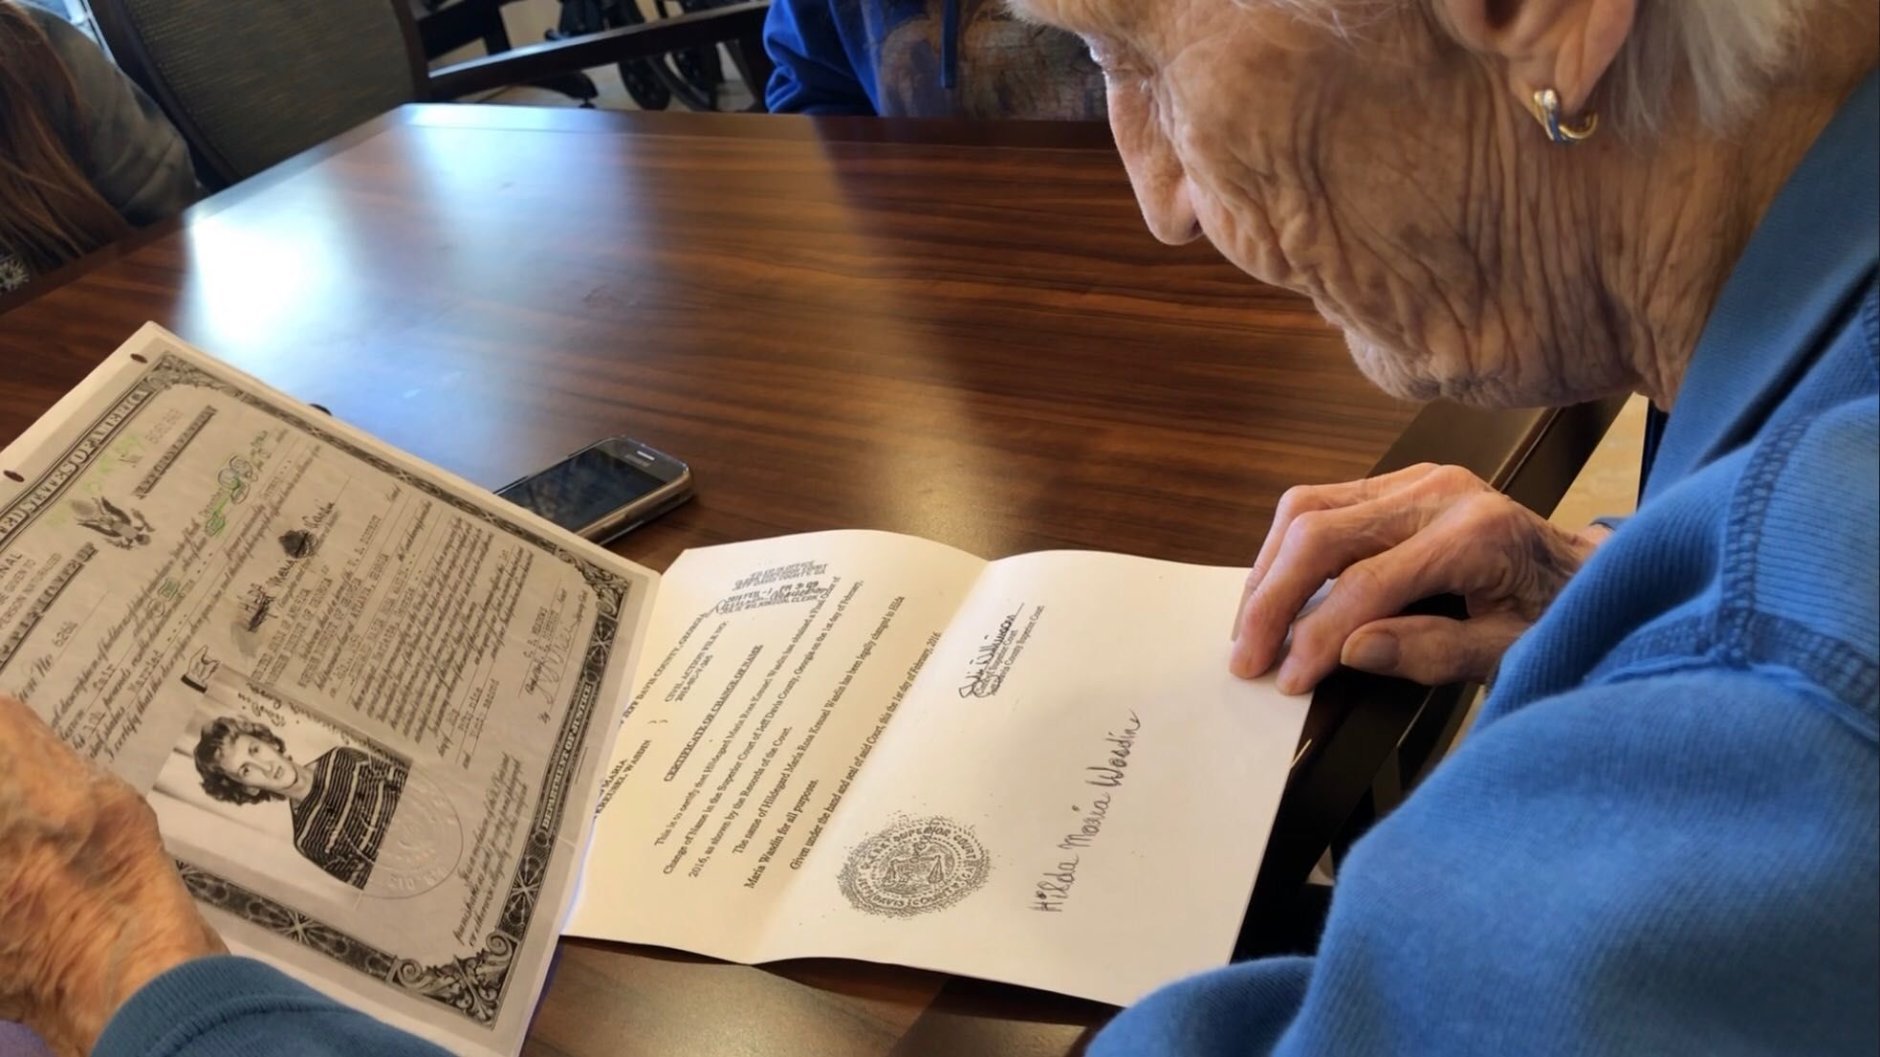 Poet's Walk resident Hilda Wasdin, 86, reviews documents from her past. (WTOP/Kristi King)